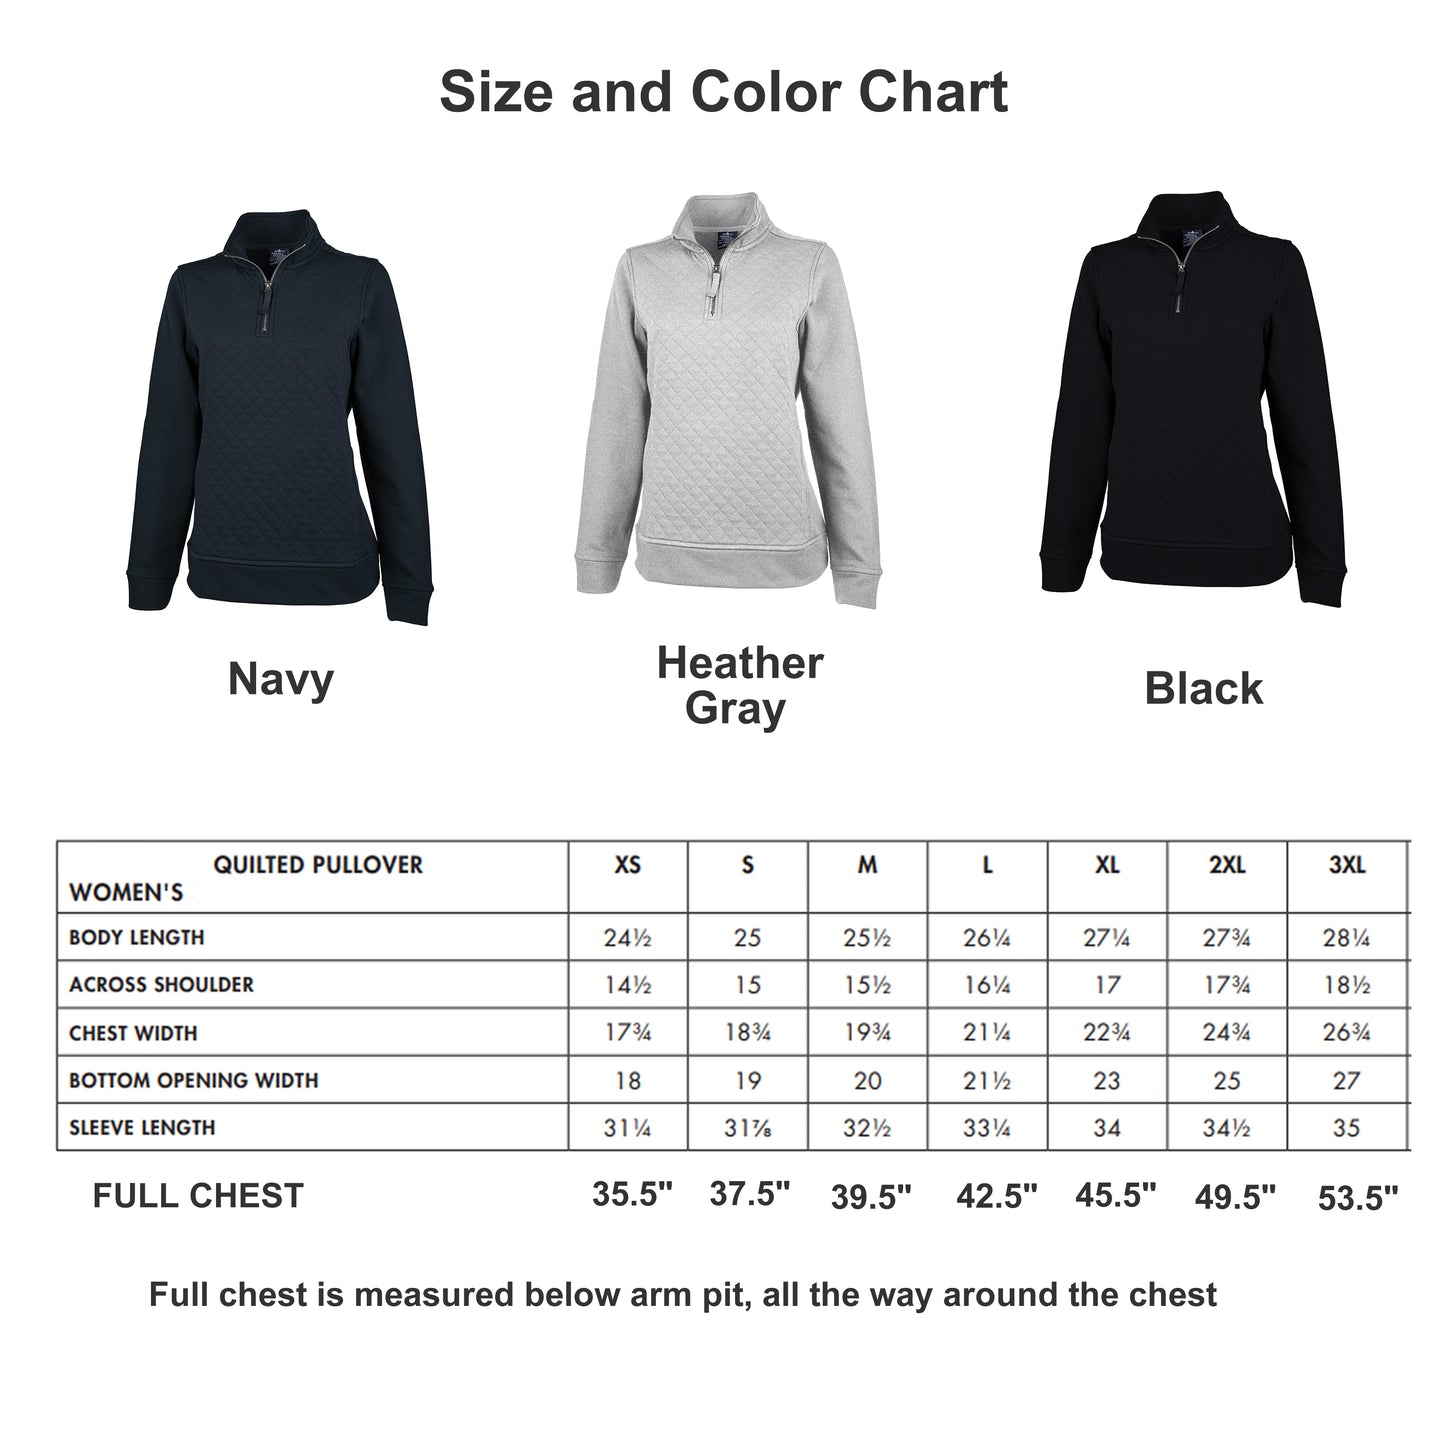 Ladies Quilted Quarter Zip Pullover Sweatshirt With Any Lake Name